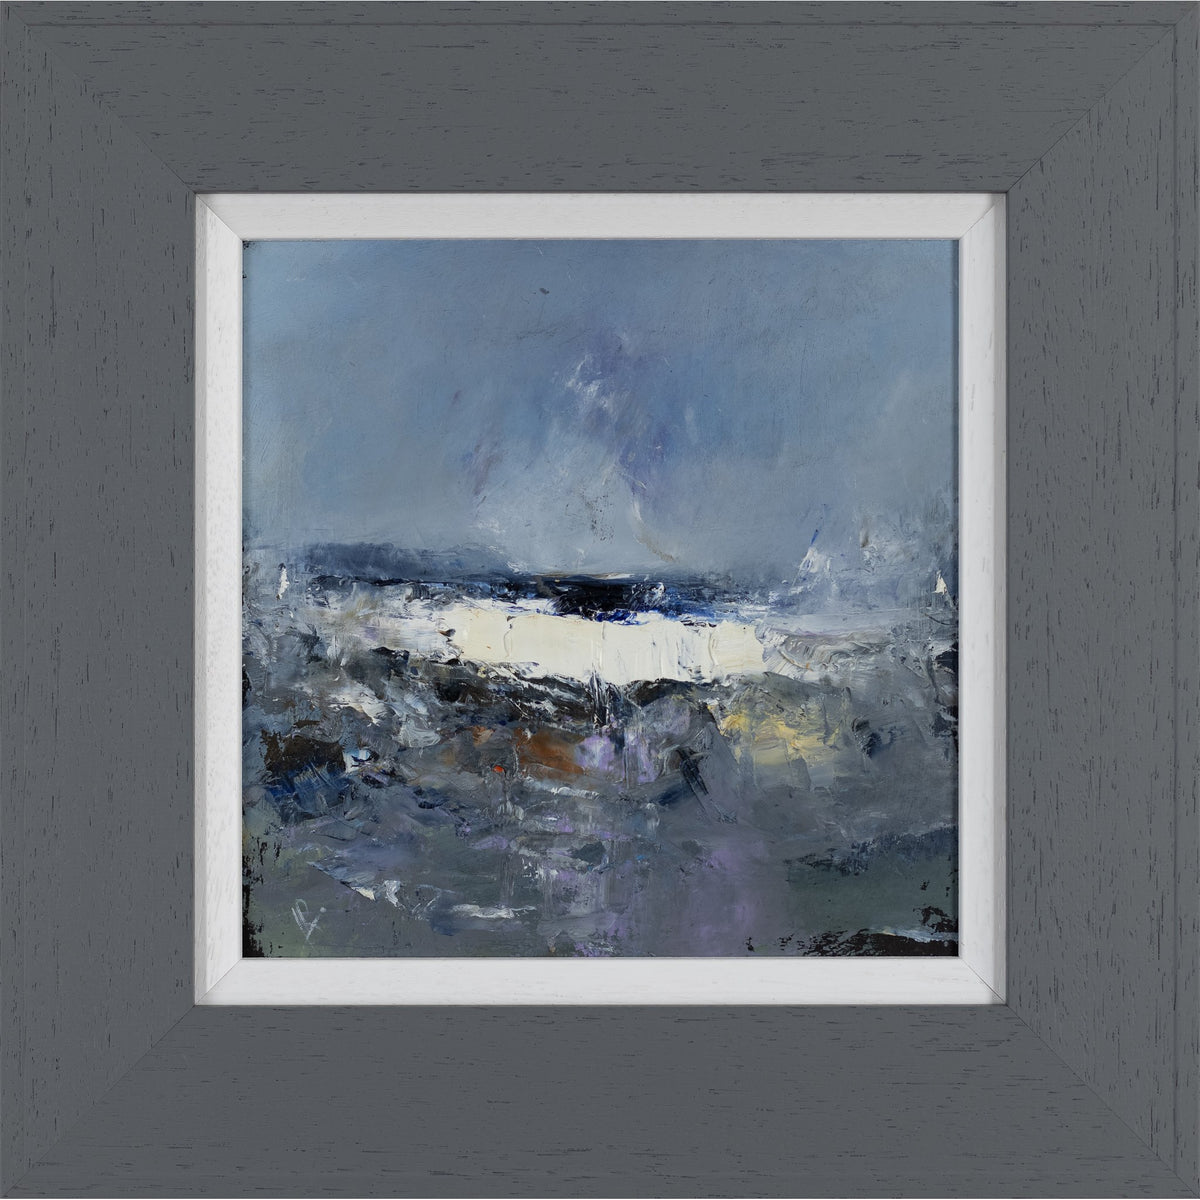 &#39;Brewing Storm&#39; oil on board original by Ian Rawnsley, available at Padstow Gallery, Cornwall